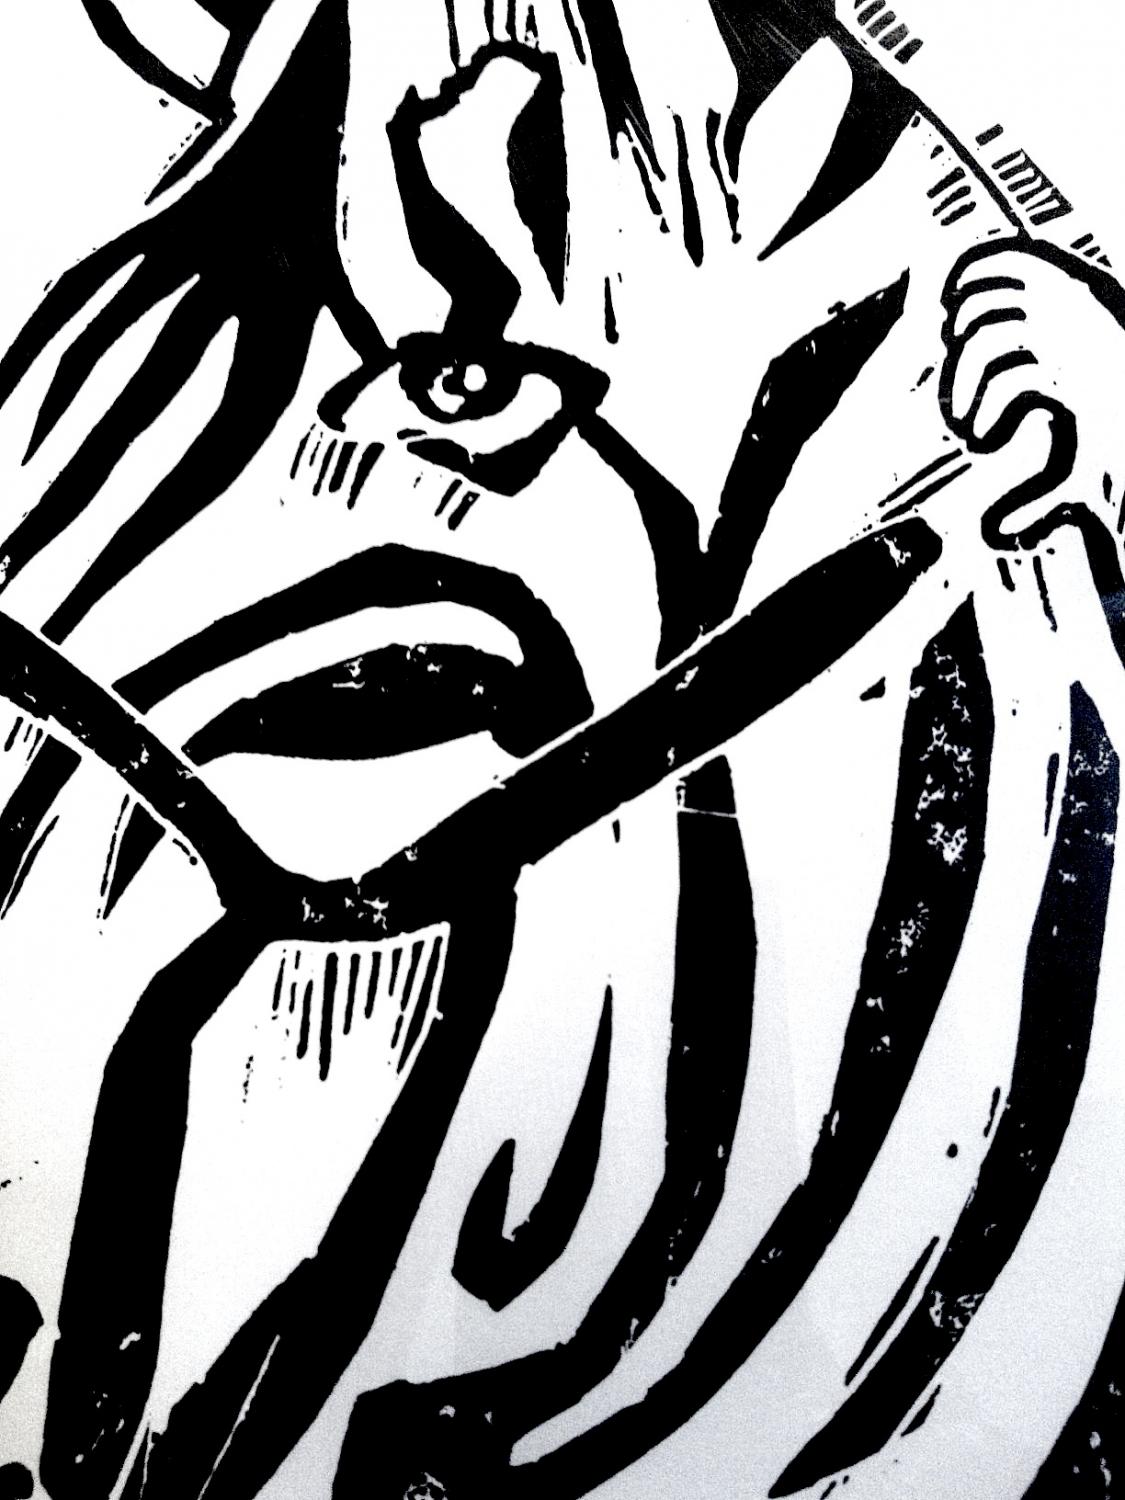 Zebra Girl Backgrounds, Compatible - PC, Mobile, Gadgets| 1125x1500 px